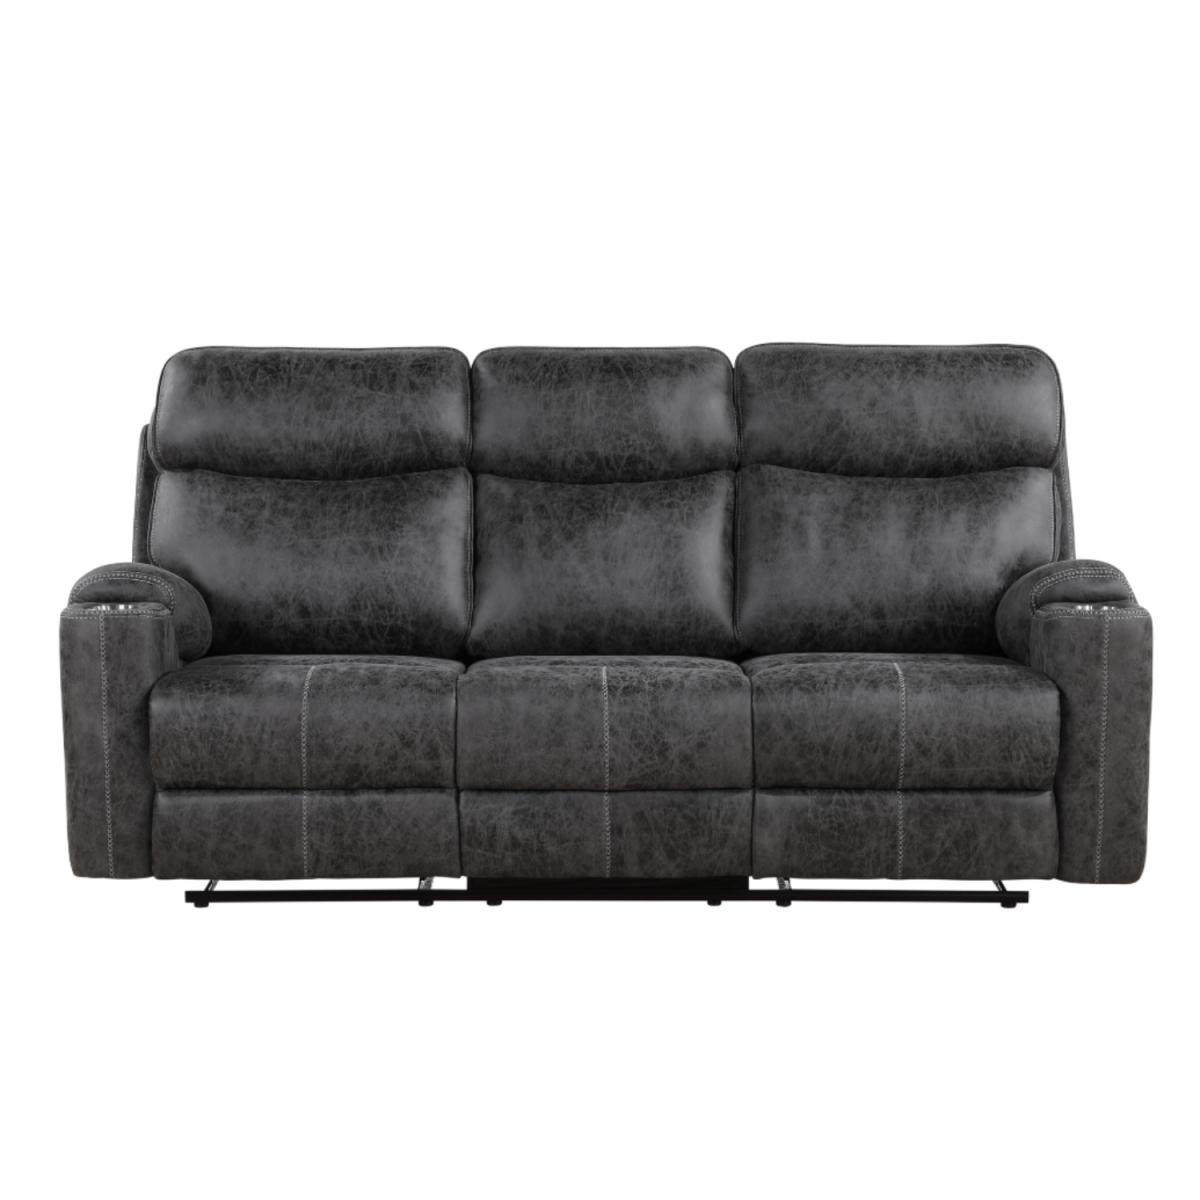 SILLON RECLINABLE 3 PERS. GRIS OSC.